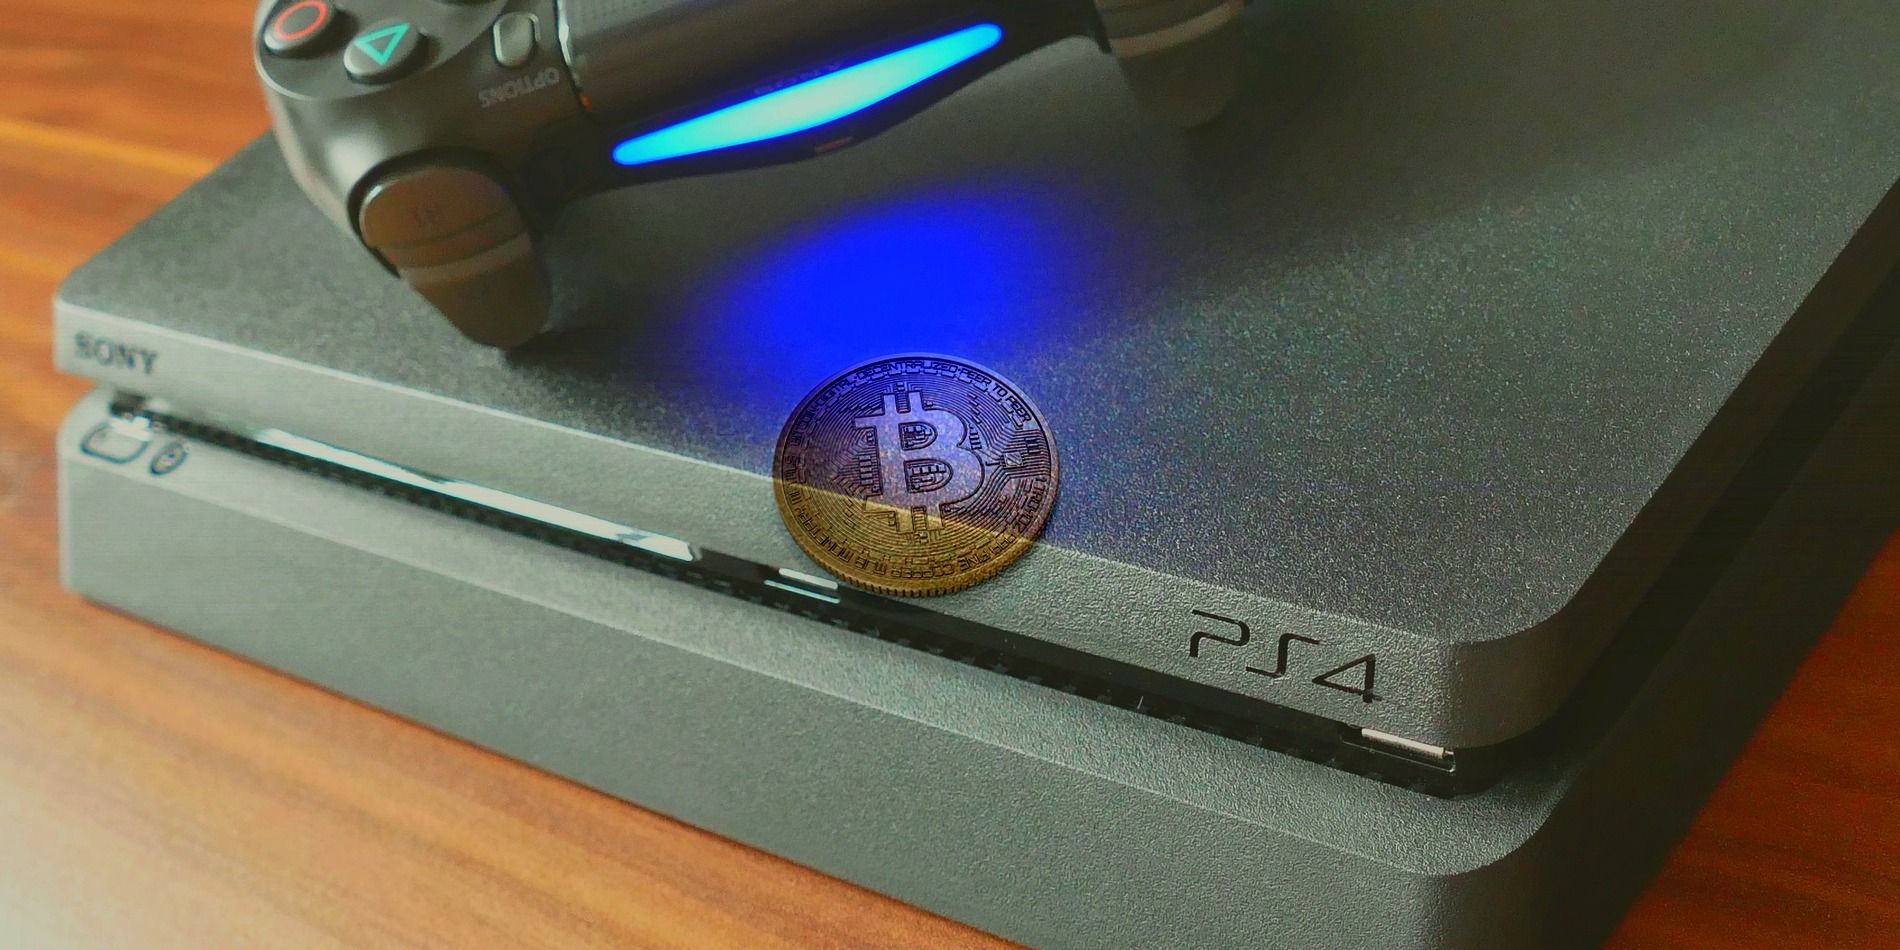 Cryptomining Farm Busted In Ukraine With PS4 Consoles